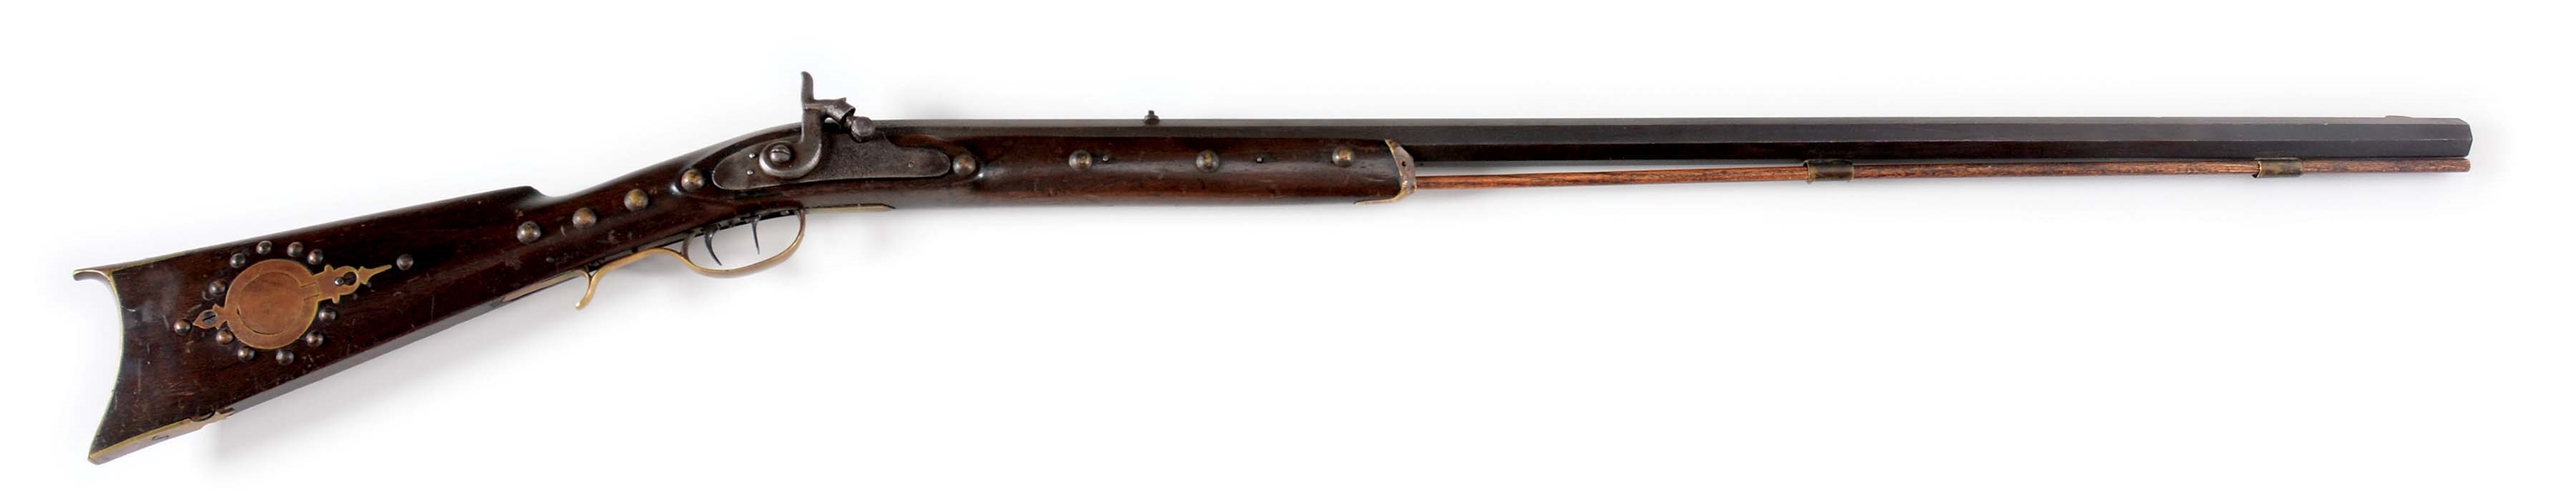 (A) 1840 TRYON INDIAN TRADE RIFLE.